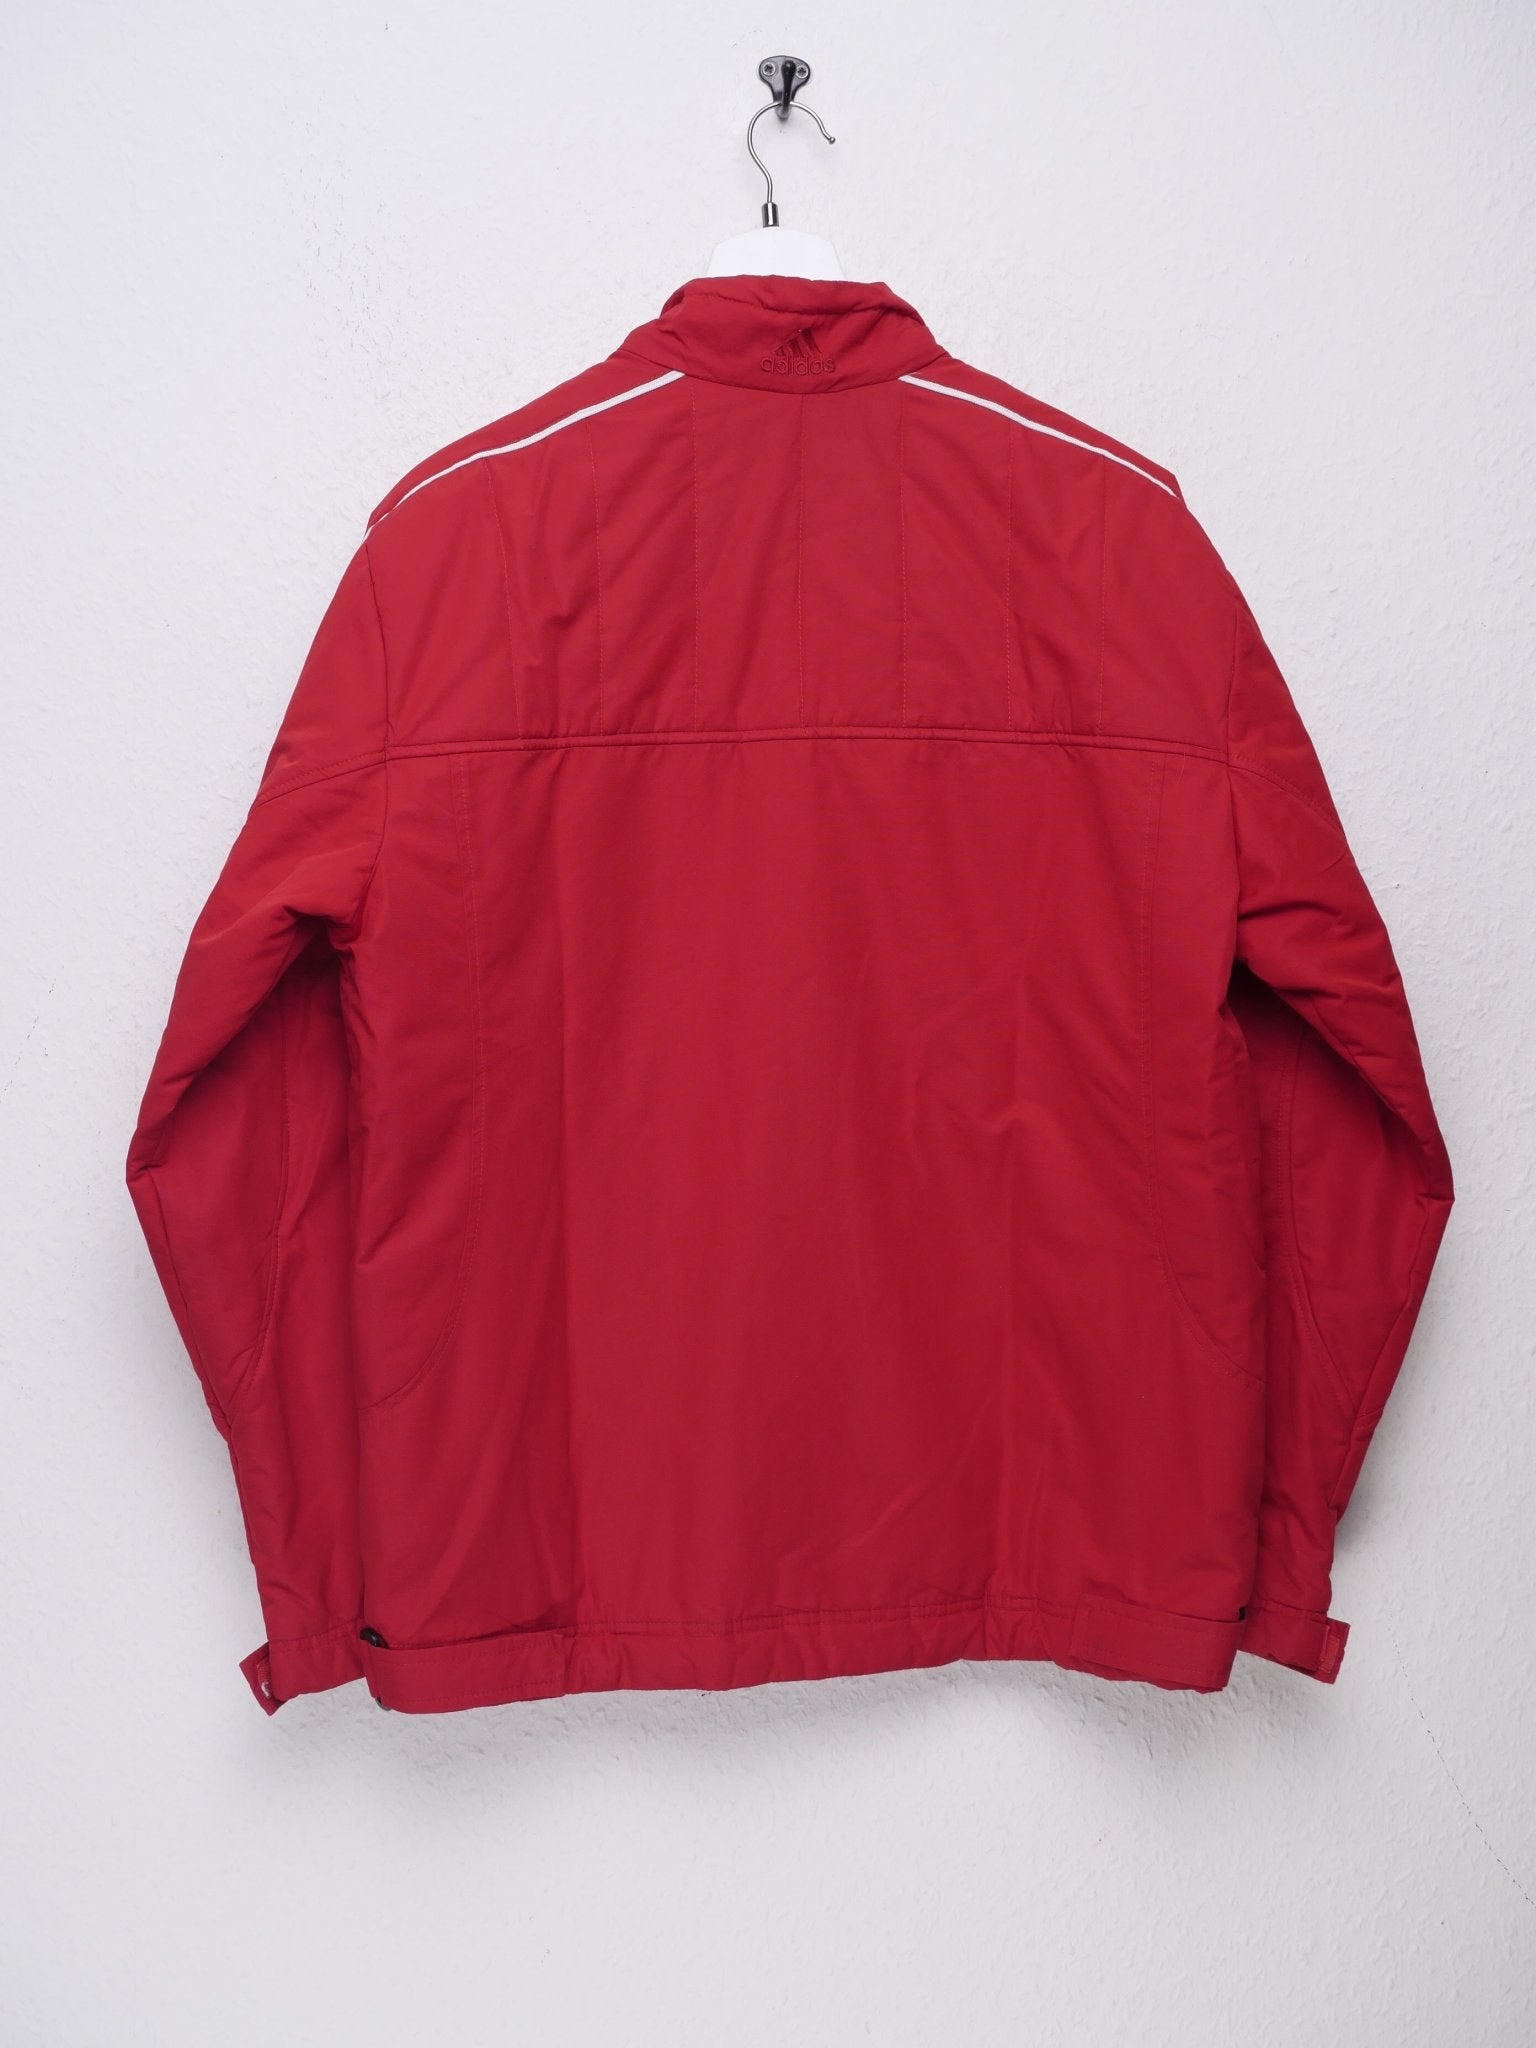 Adidas embroidered Spellout red thick Wind Jacket - Peeces